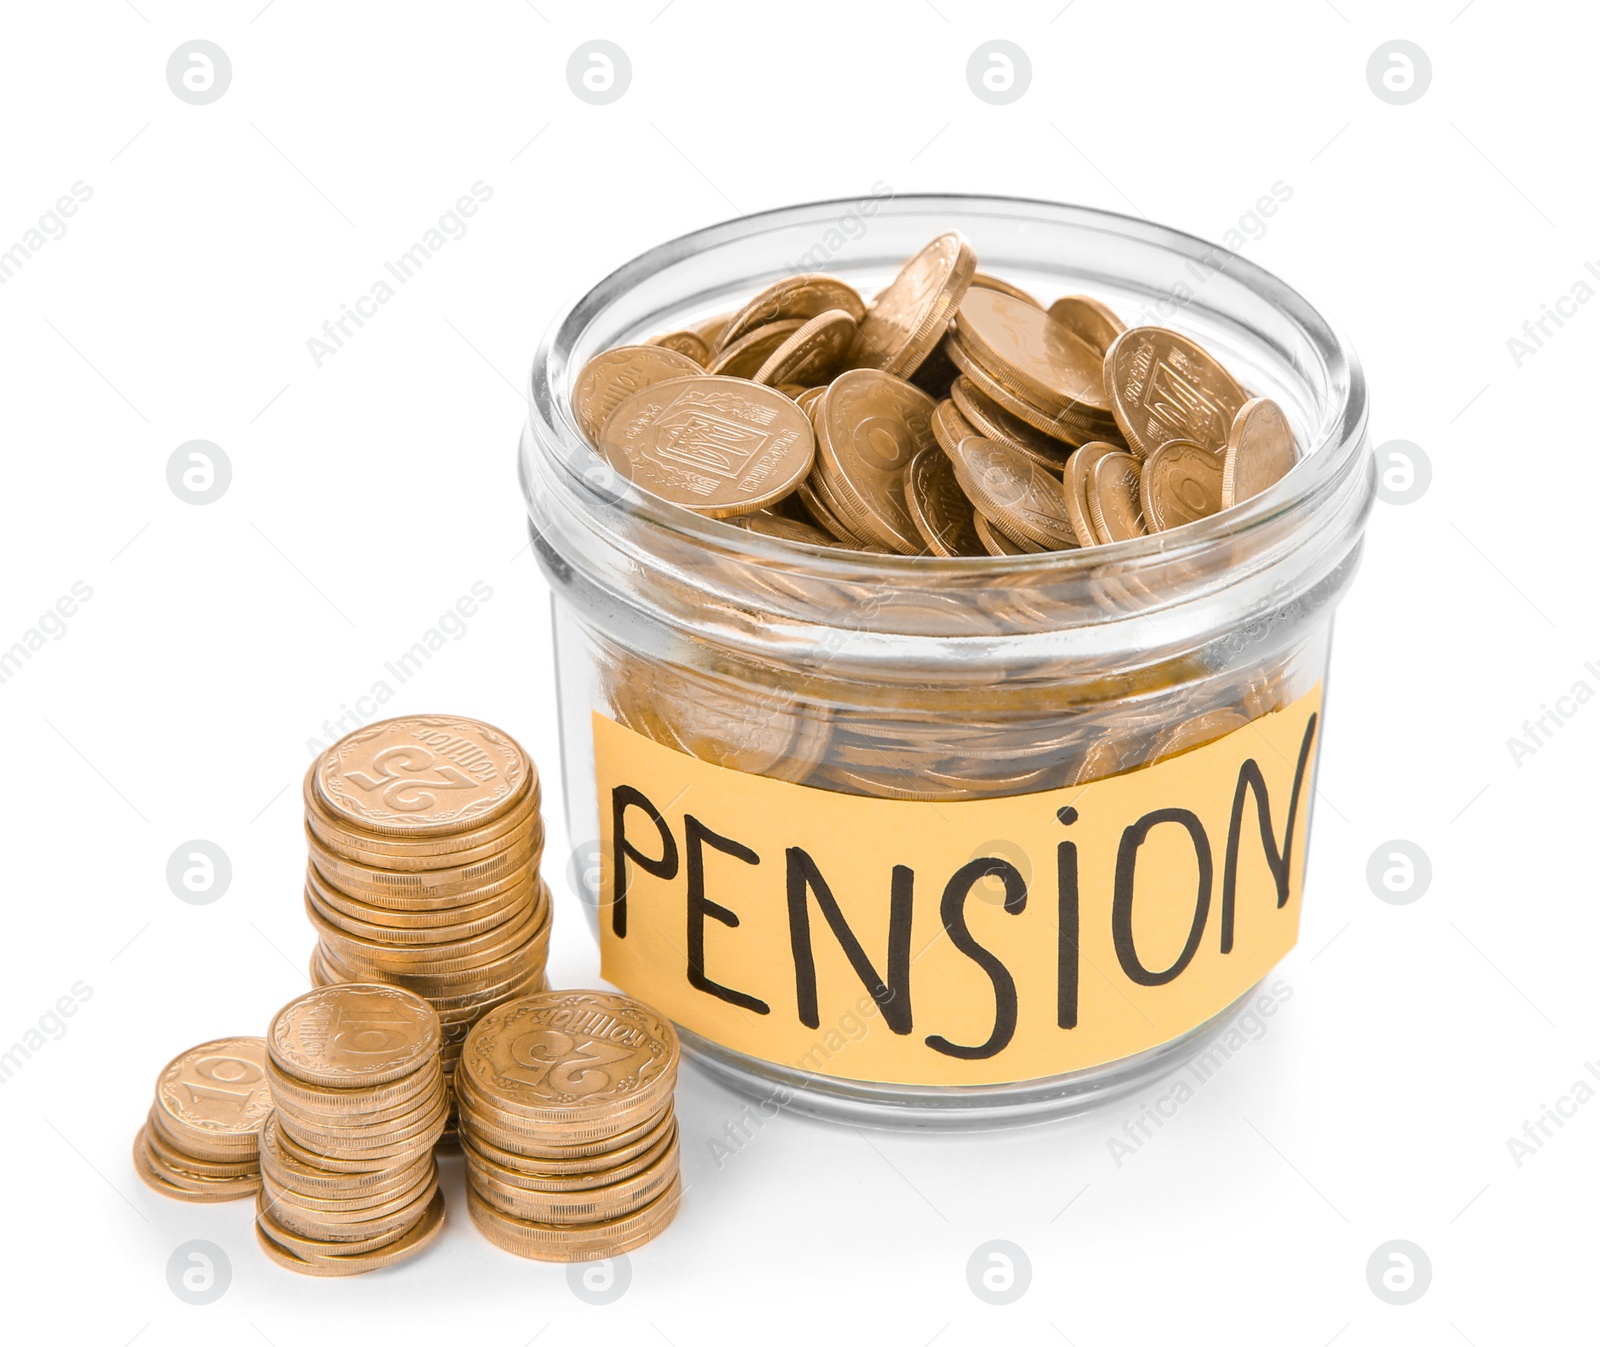 Photo of Glass jar with label "PENSION" and coins on white background